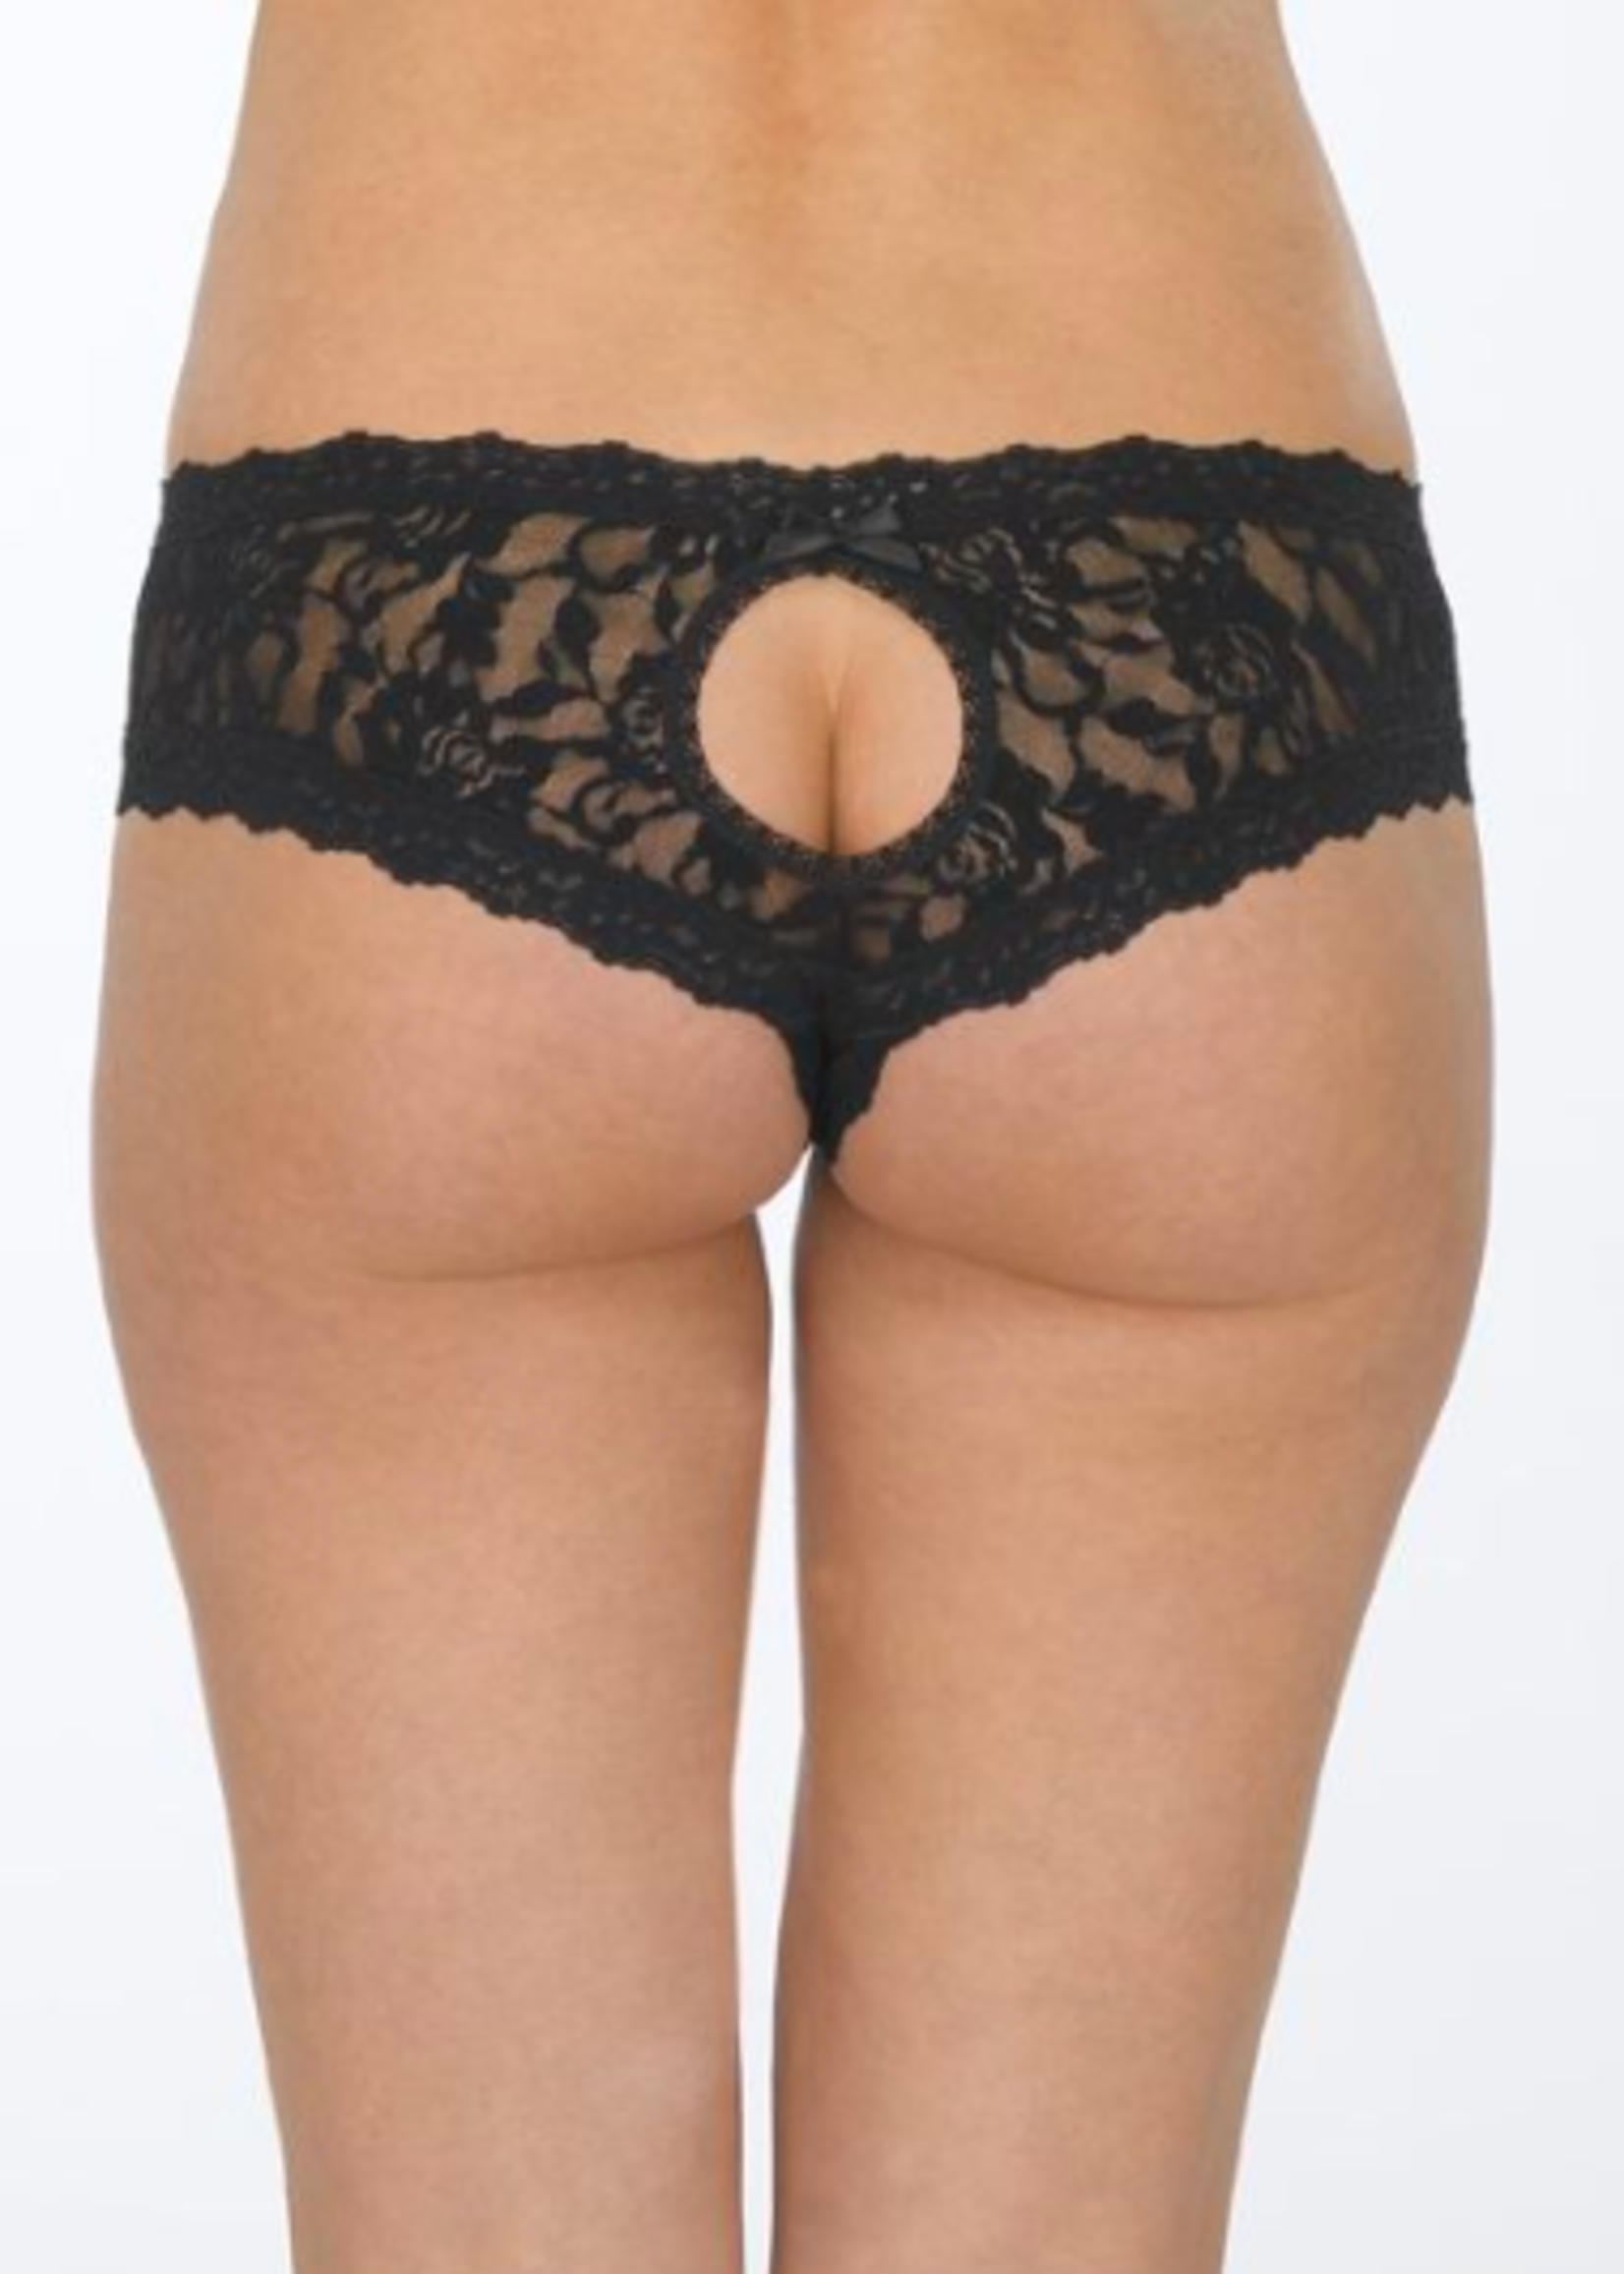 Hanky Panky Signature Lace Crotchless Cheeky Hipster